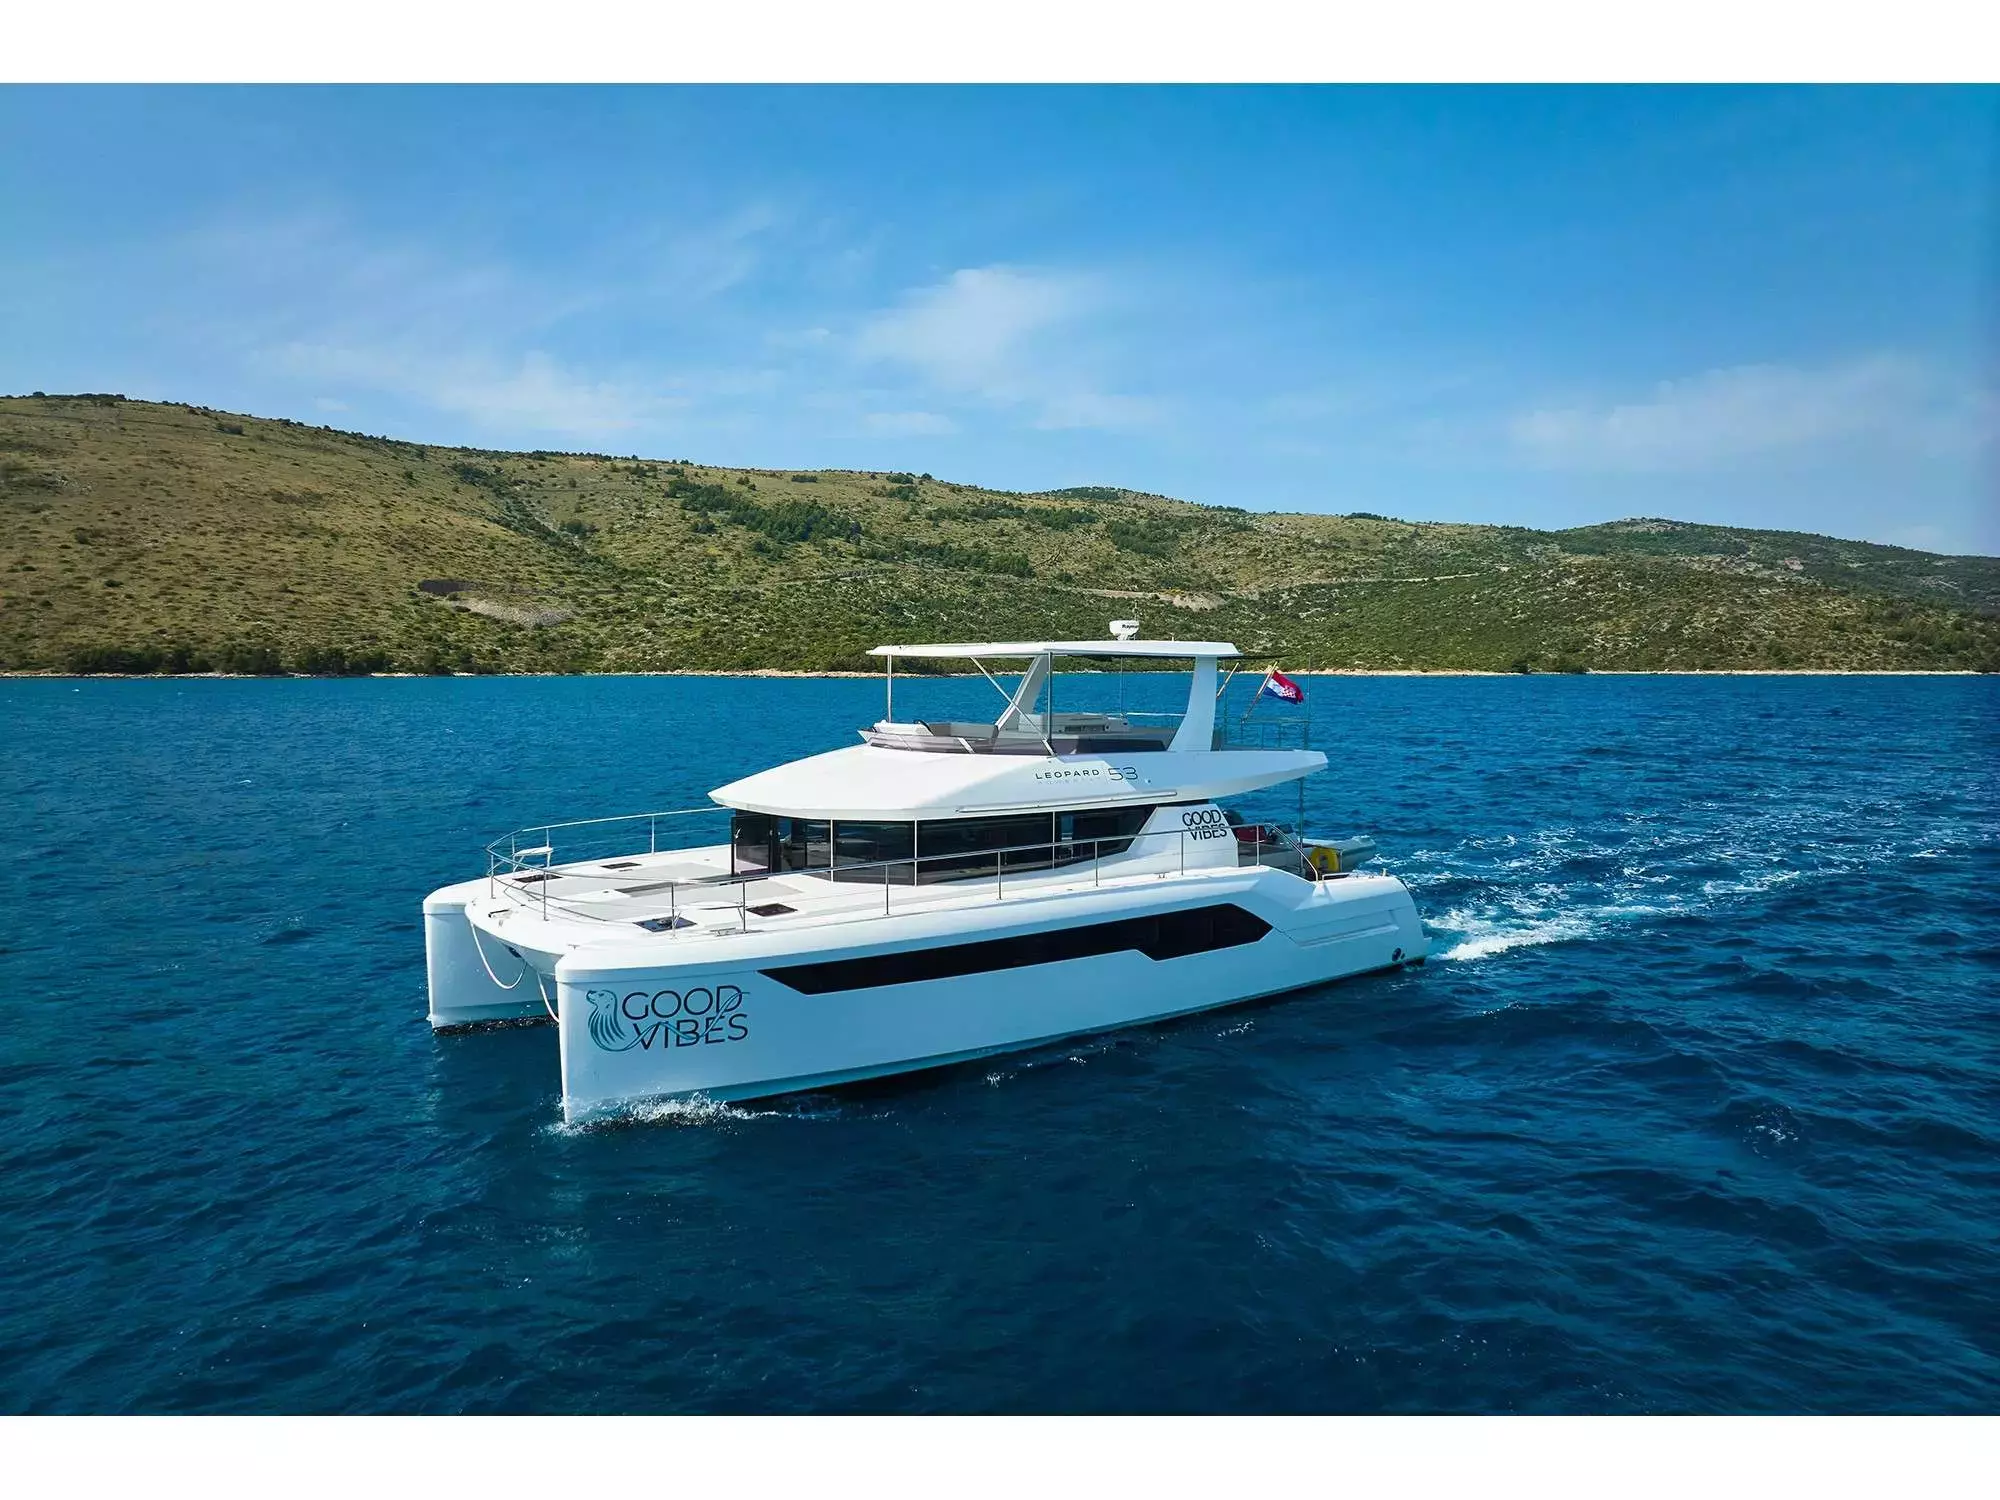 Good Vibes by Leopard Catamarans - Top rates for a Rental of a private Power Catamaran in Croatia